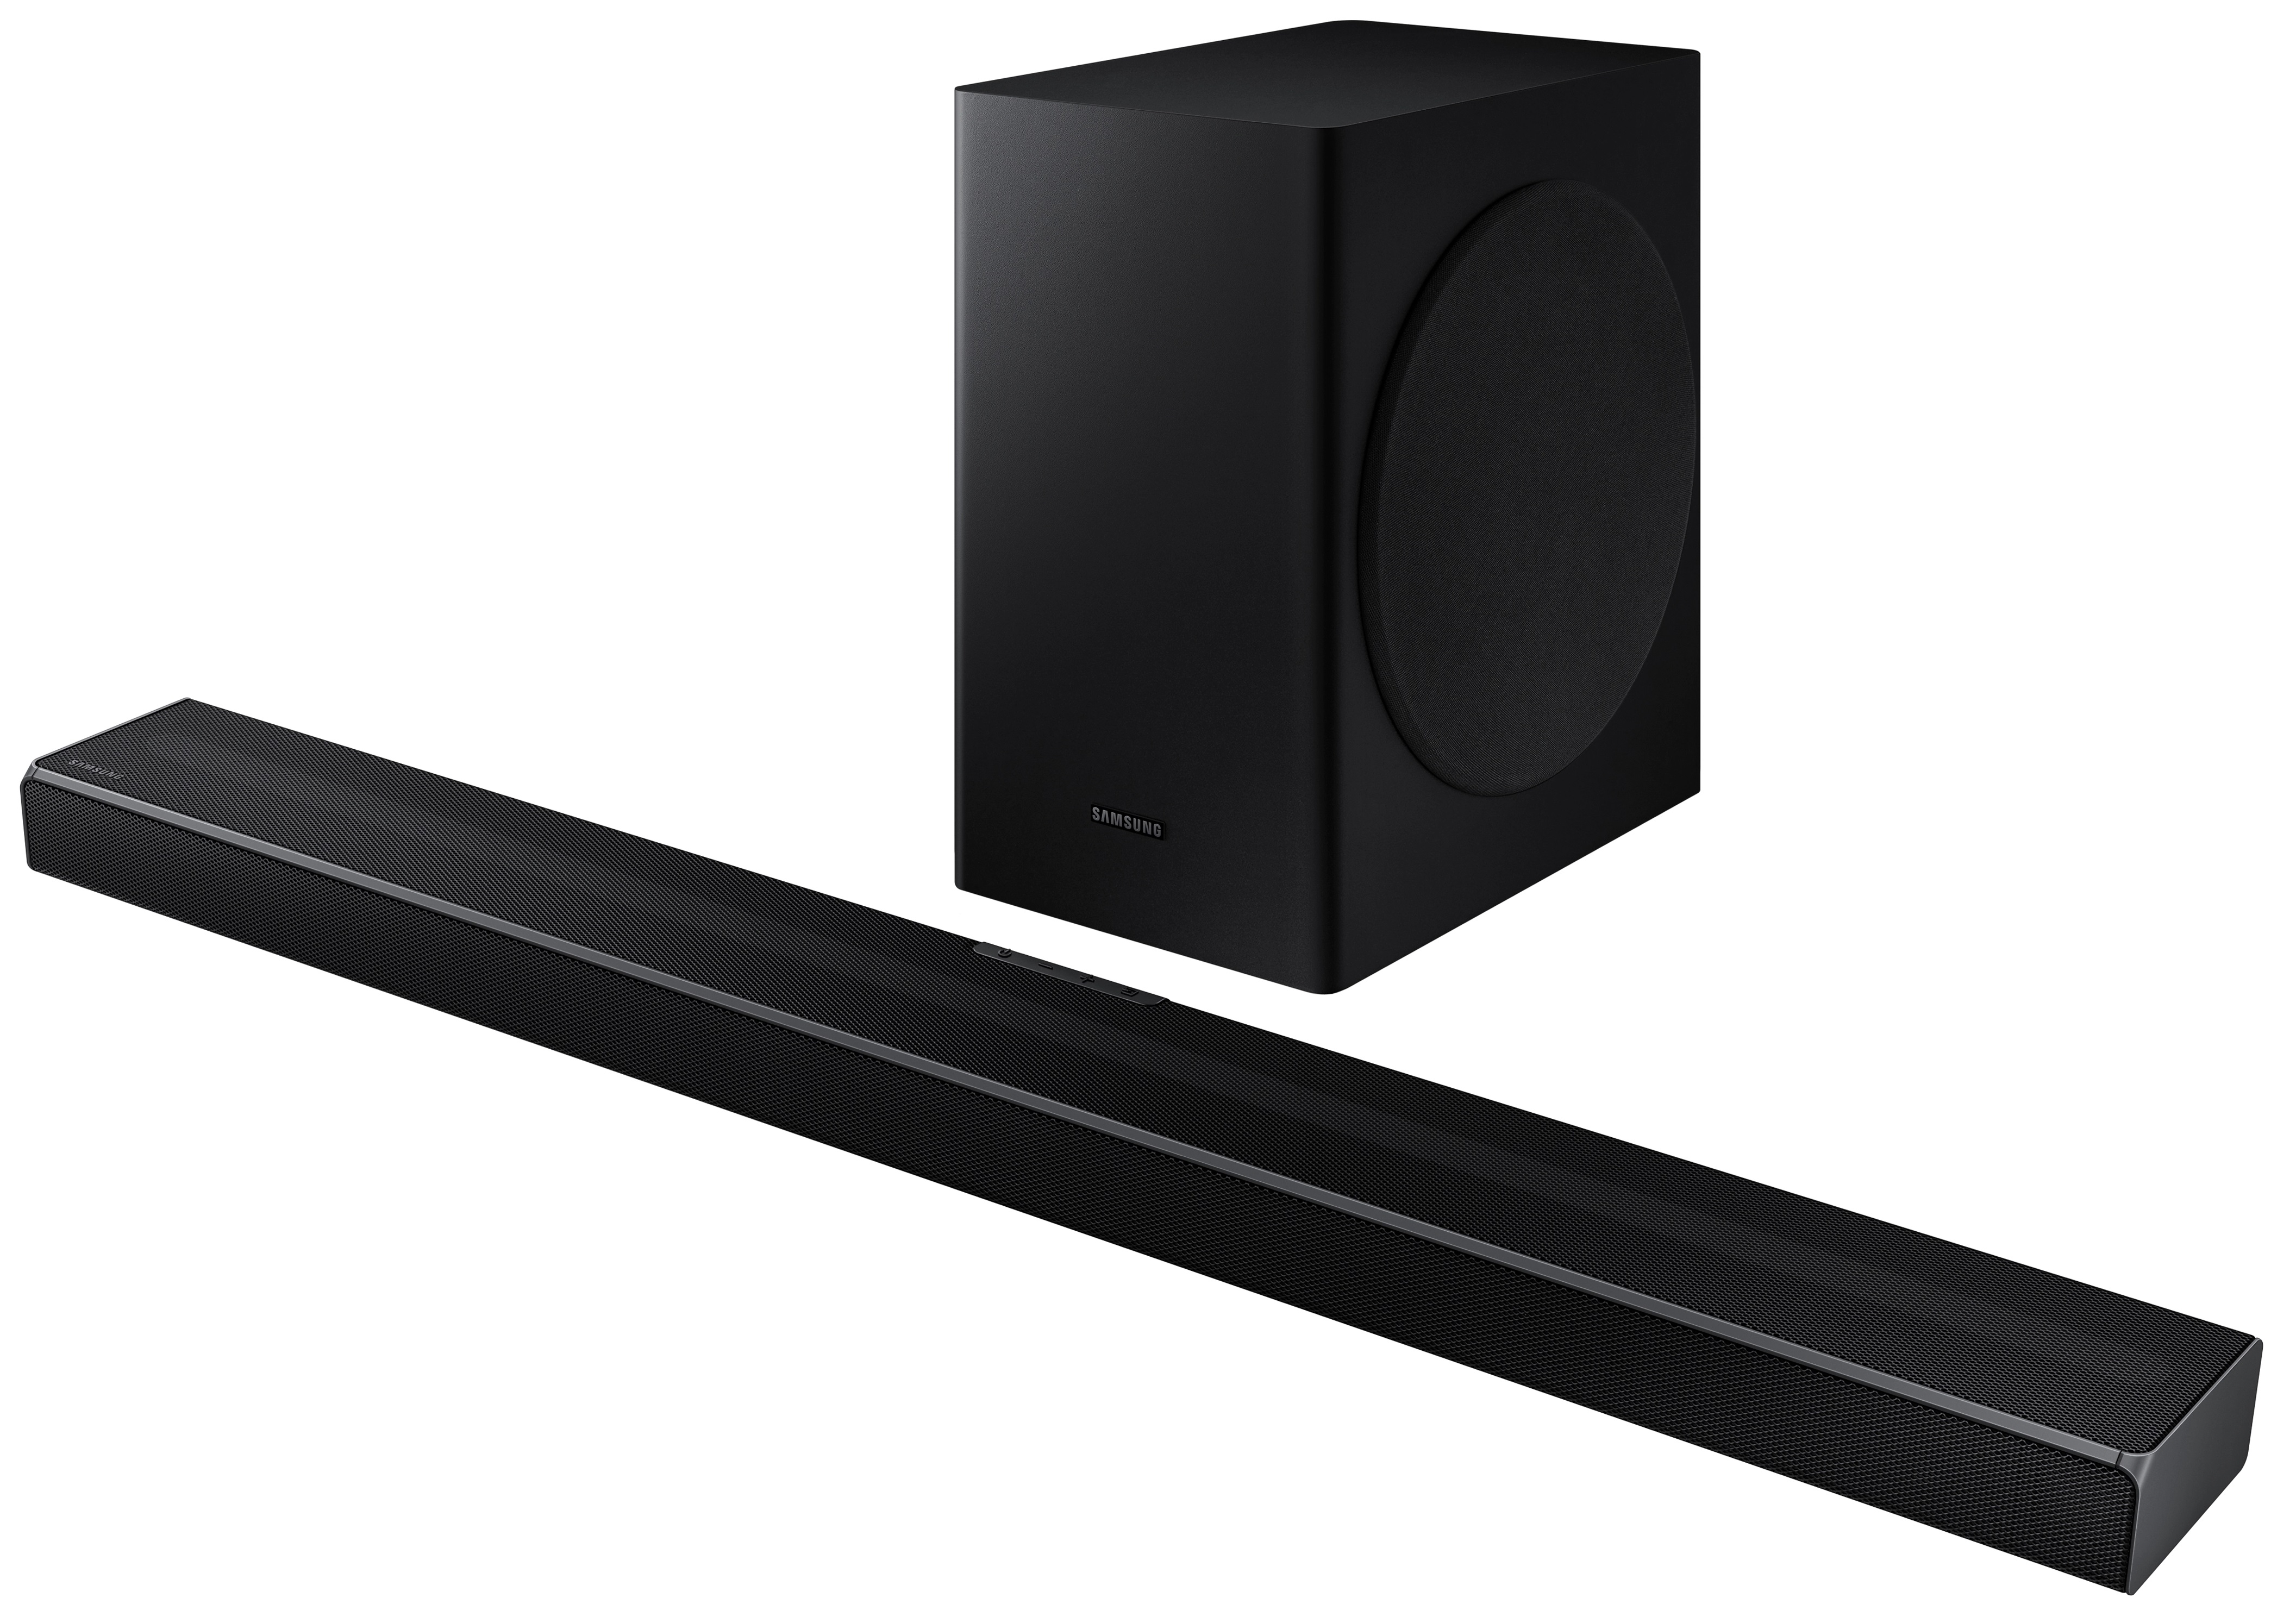 Samsung HW-Q60T 5.1ch Acoustic Beam with Dolby Digital 5.1 / DTS Virtual:X Zeglin's Home &